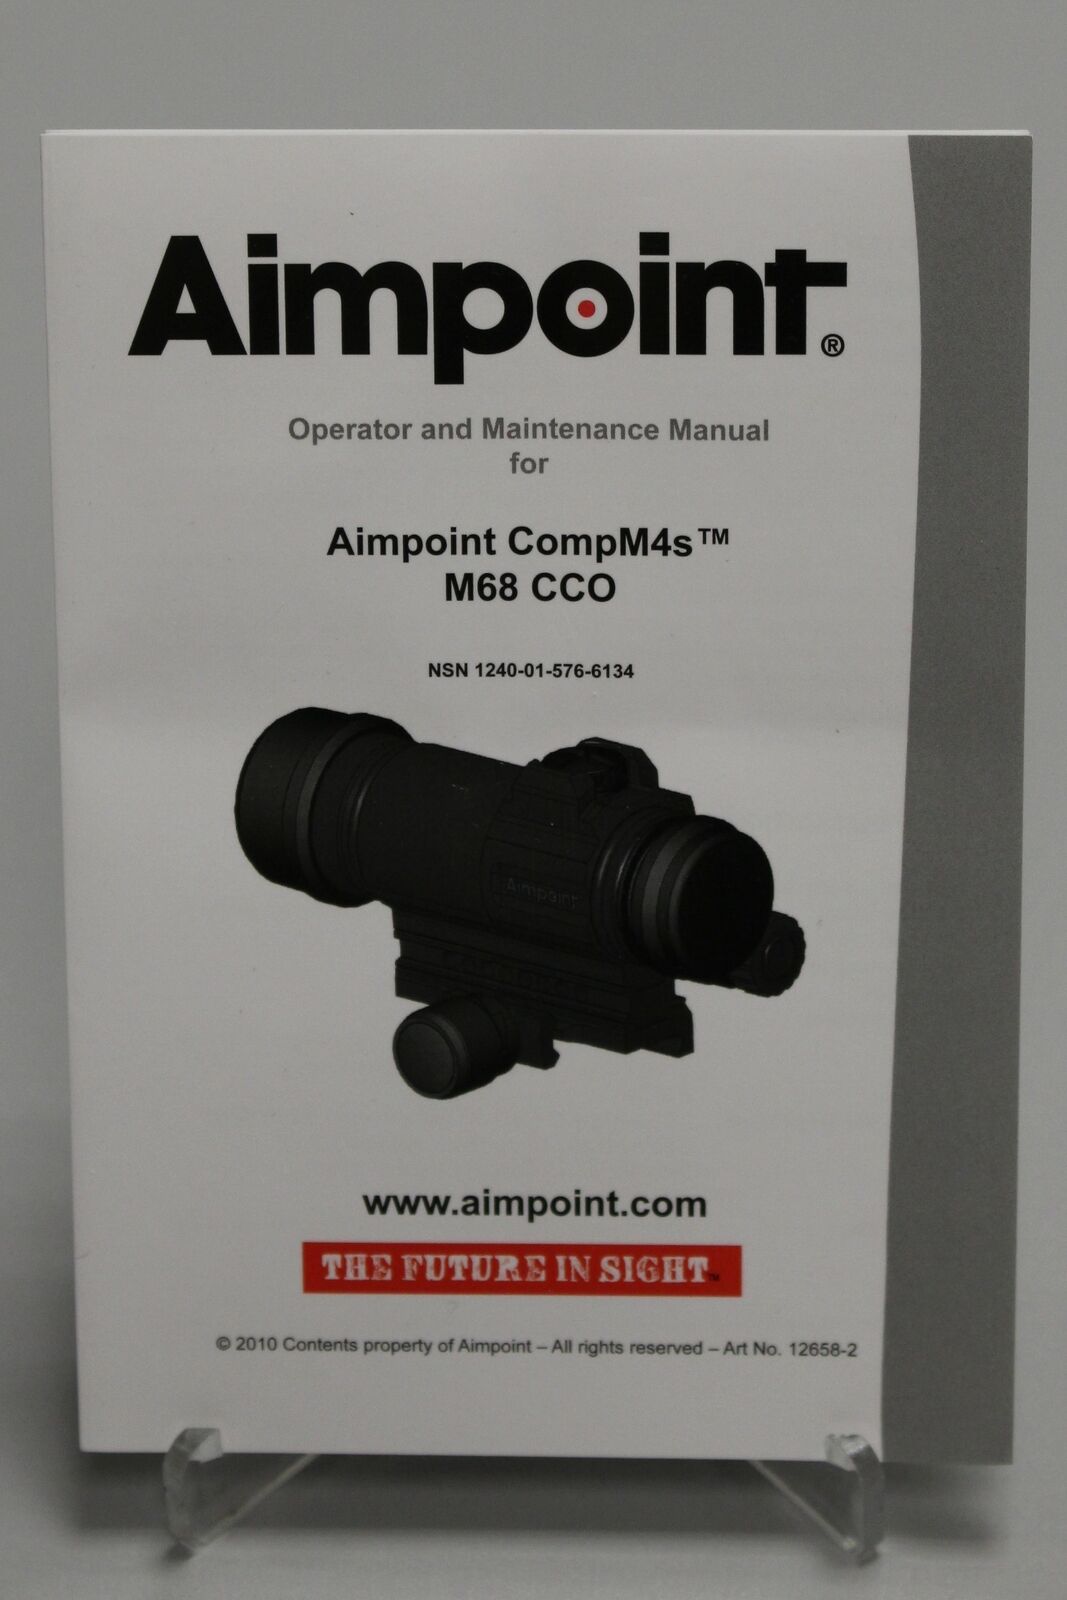 Operator & Maintenance Manual for Aimpoint CompM4s M68 CCO, 1240-01-576-6134